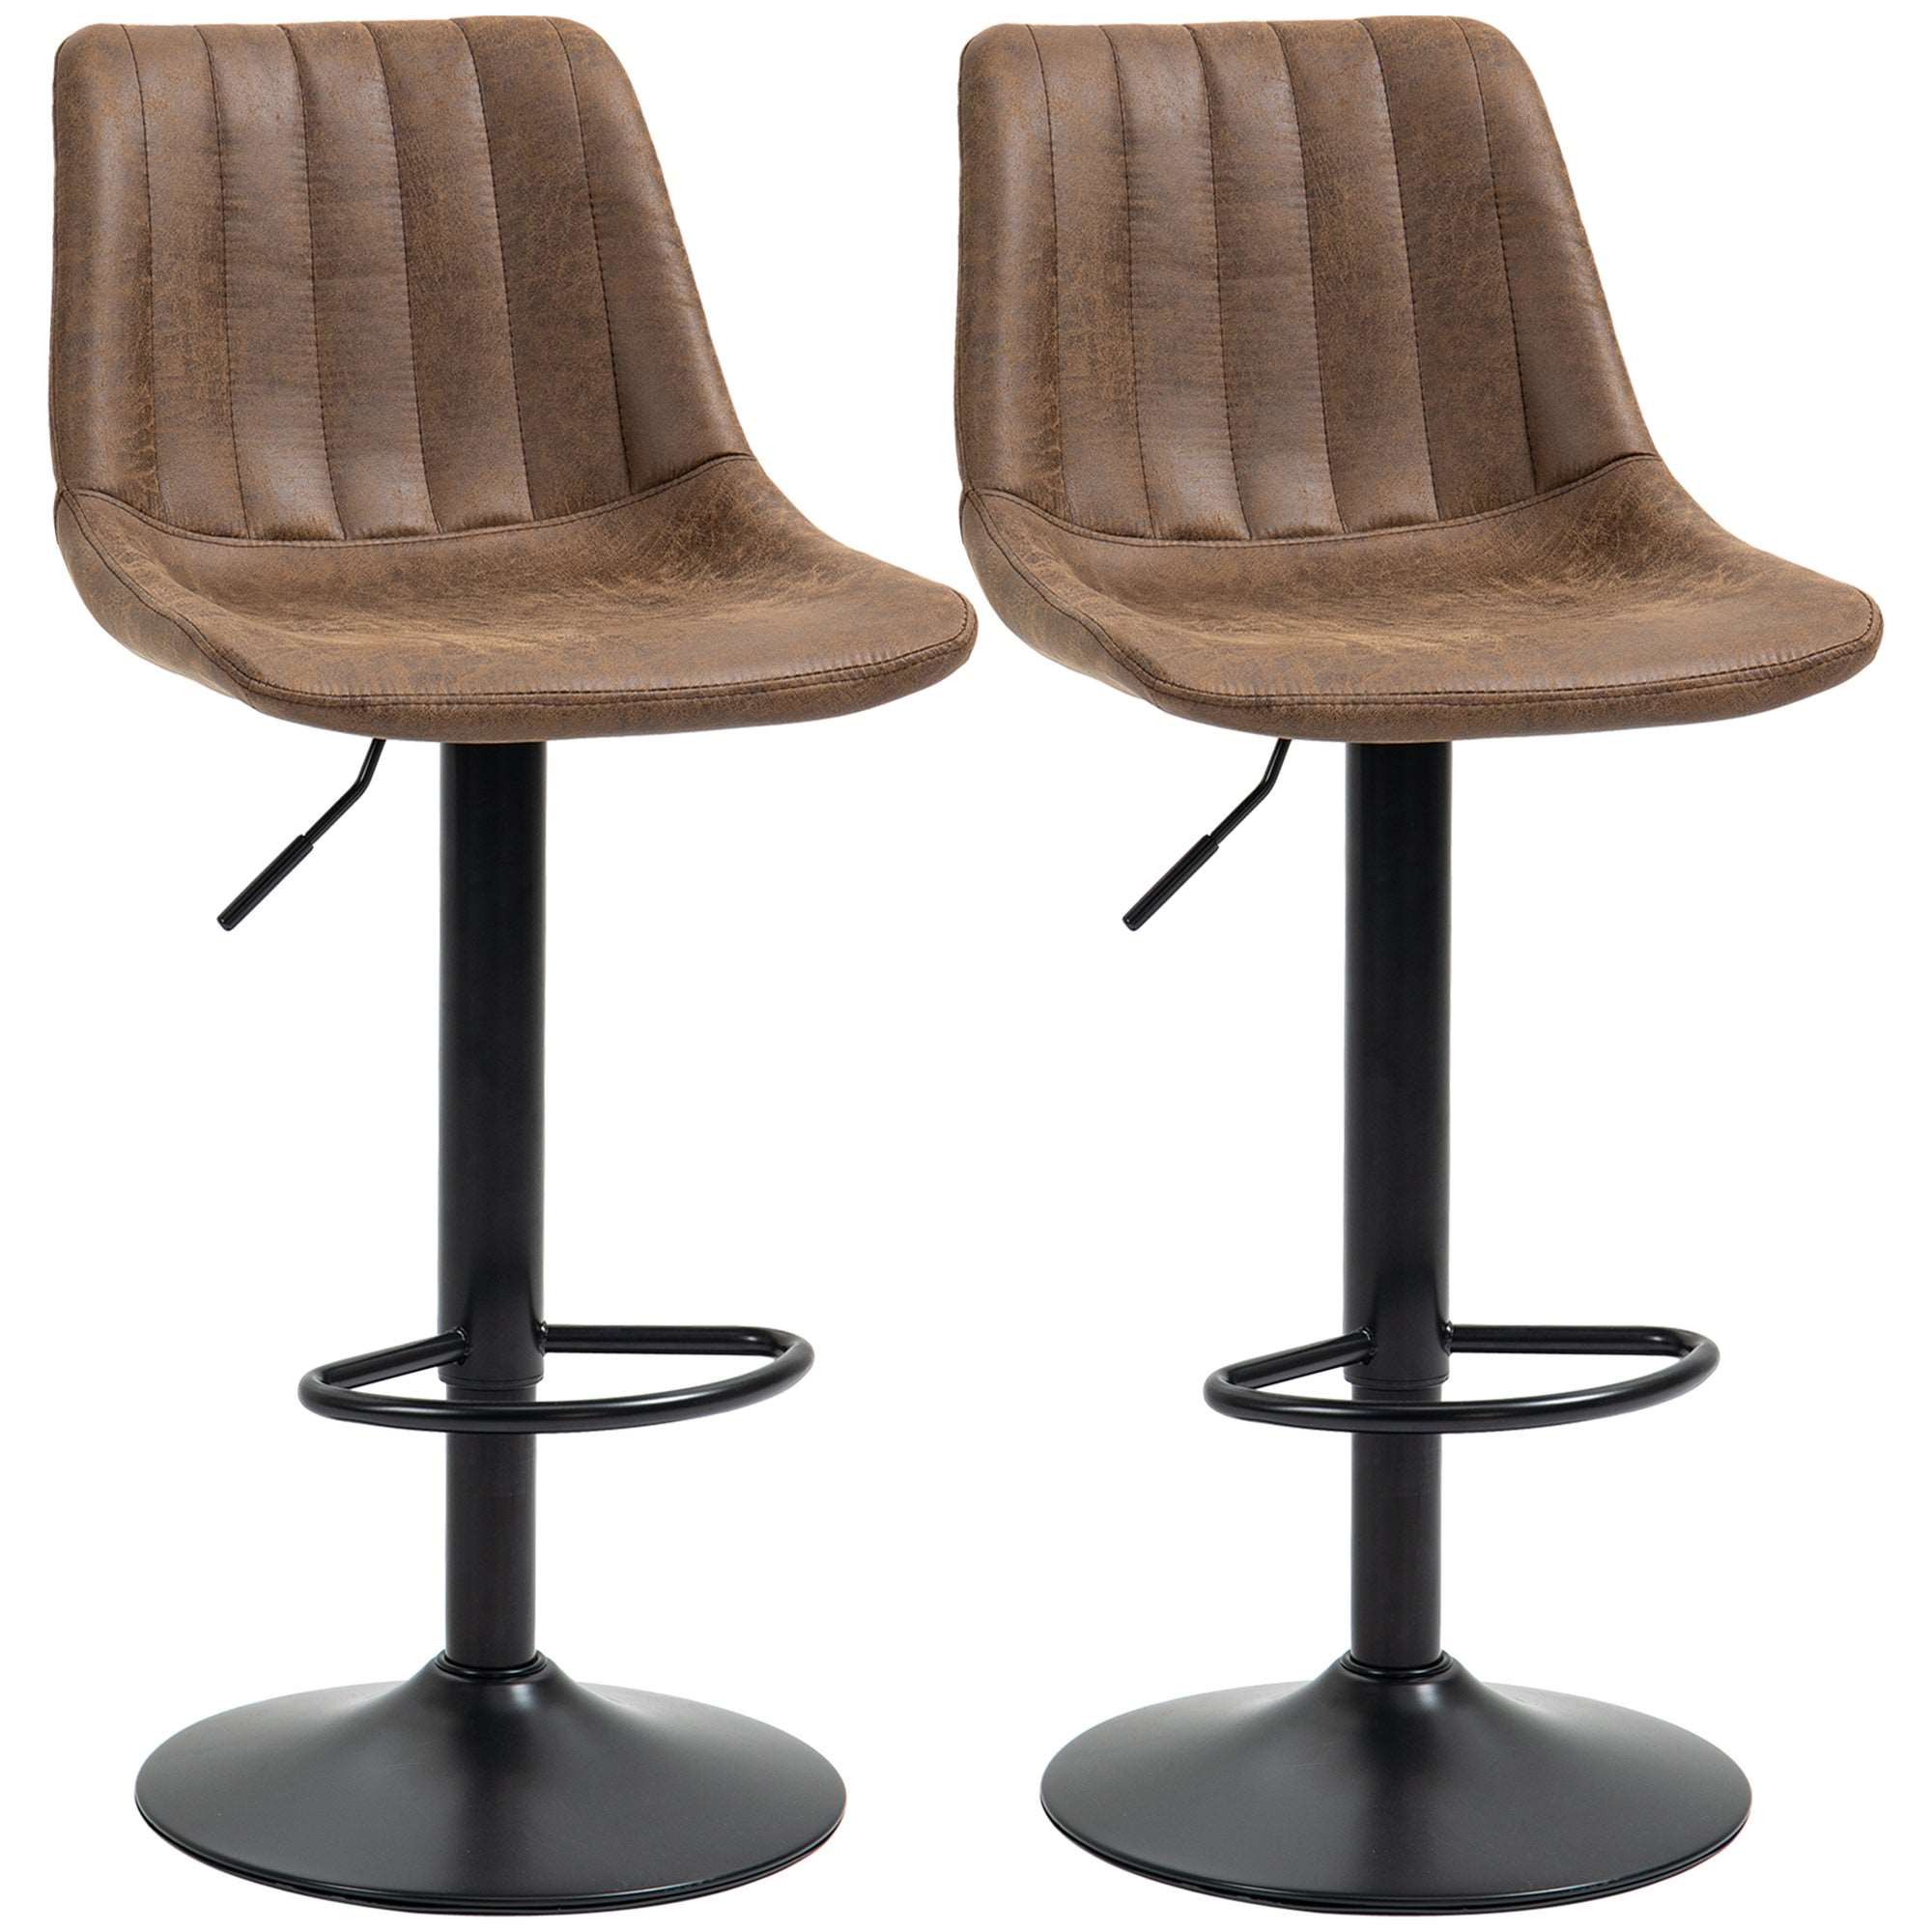 Adjustable Bar Stools Set of 2 Counter Height Barstools Dining Chairs 360Â° Swivel with Footrest for Home Pub, Brown  AOSOM   